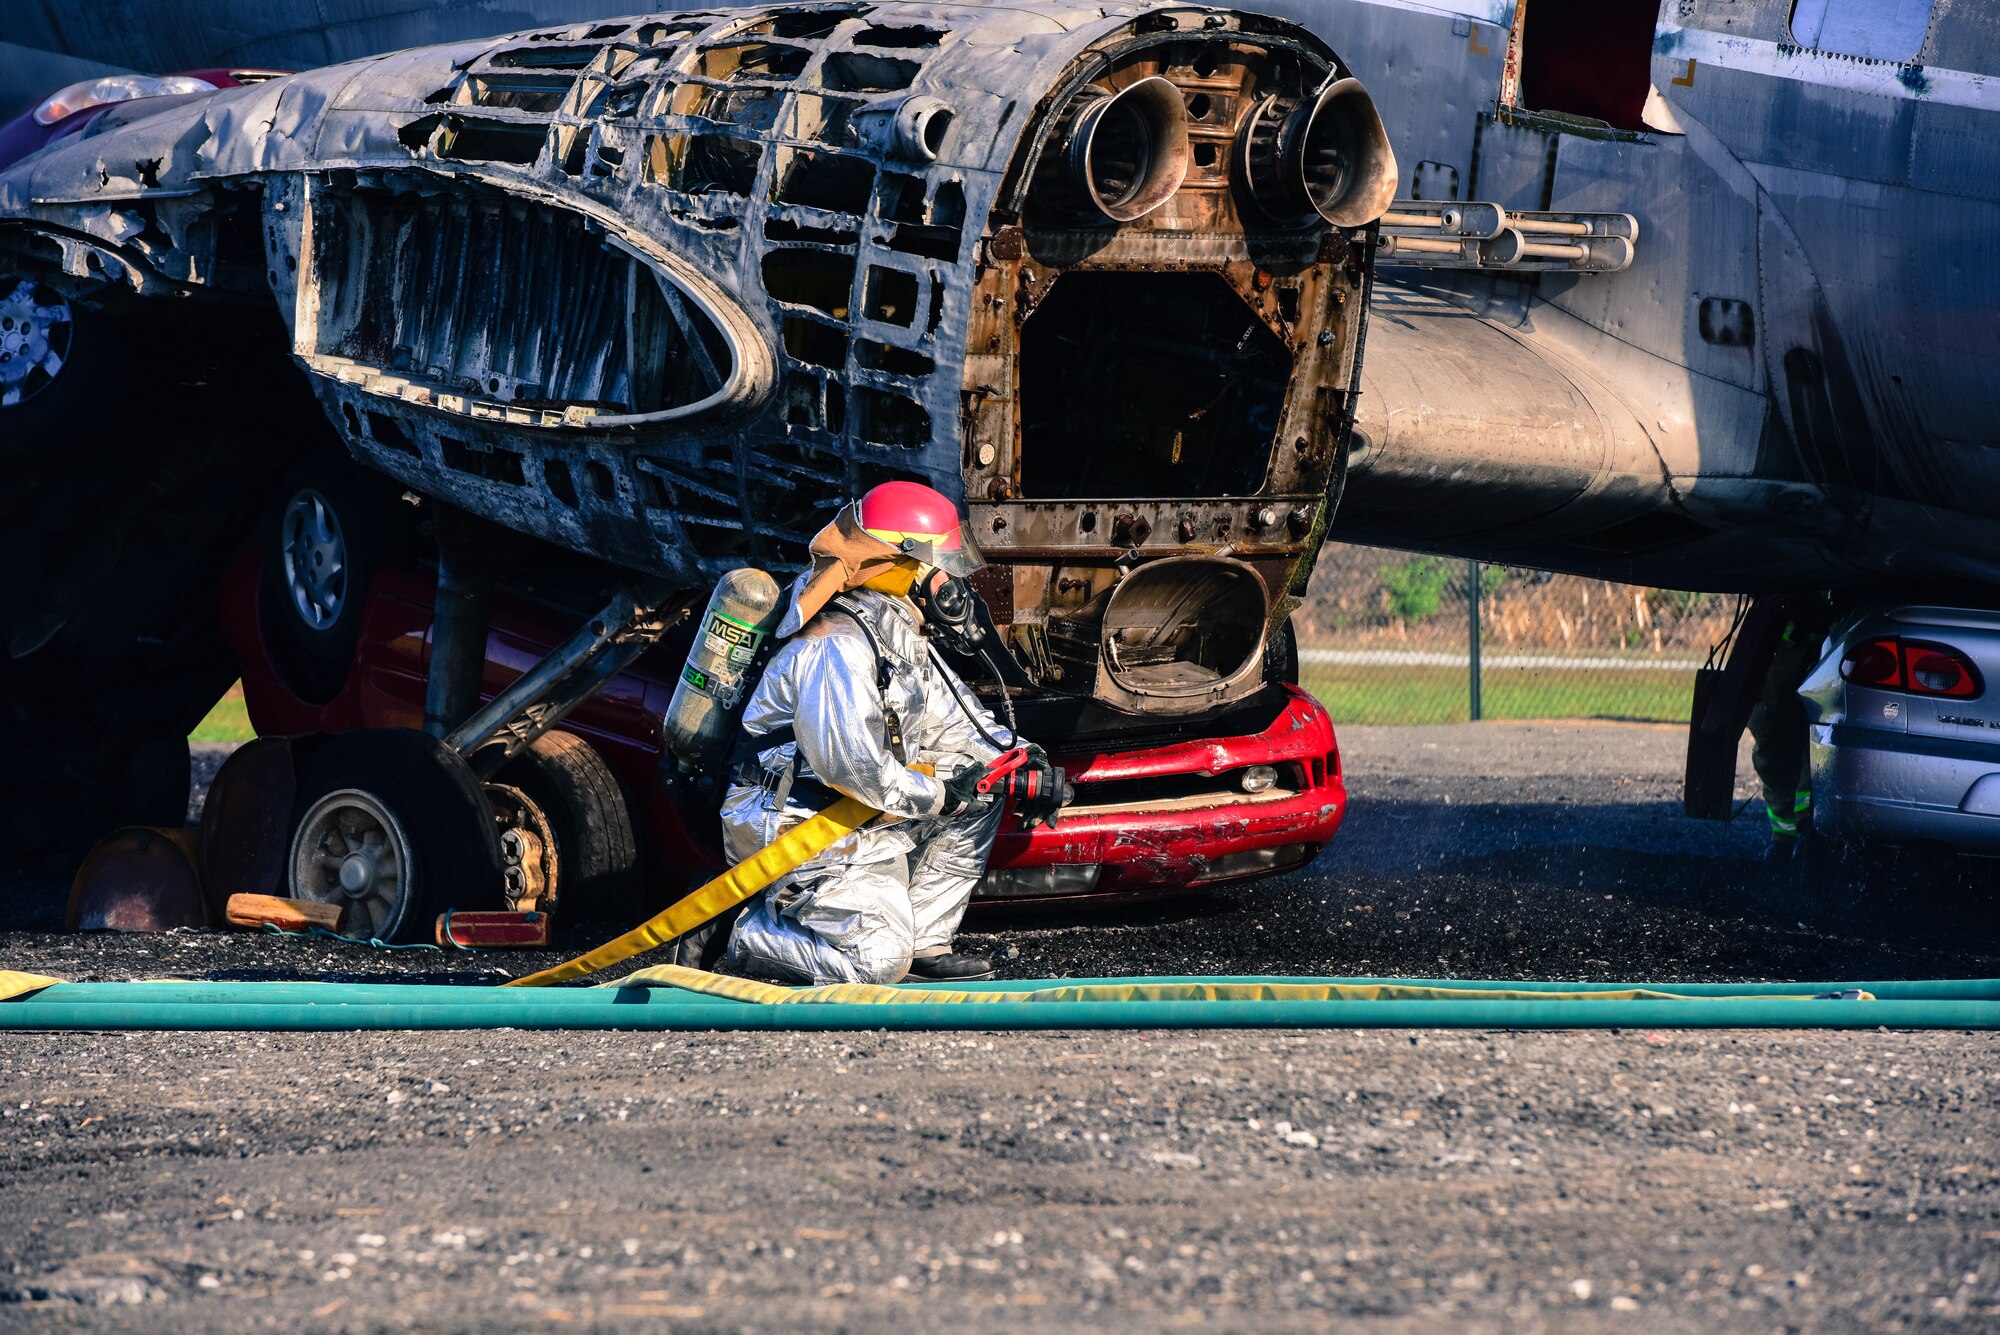 A firefighter crouches during a during a large-scale exercise September 21, 2019, at Harrisburg International Airport in Middletown, Pennsylvania.